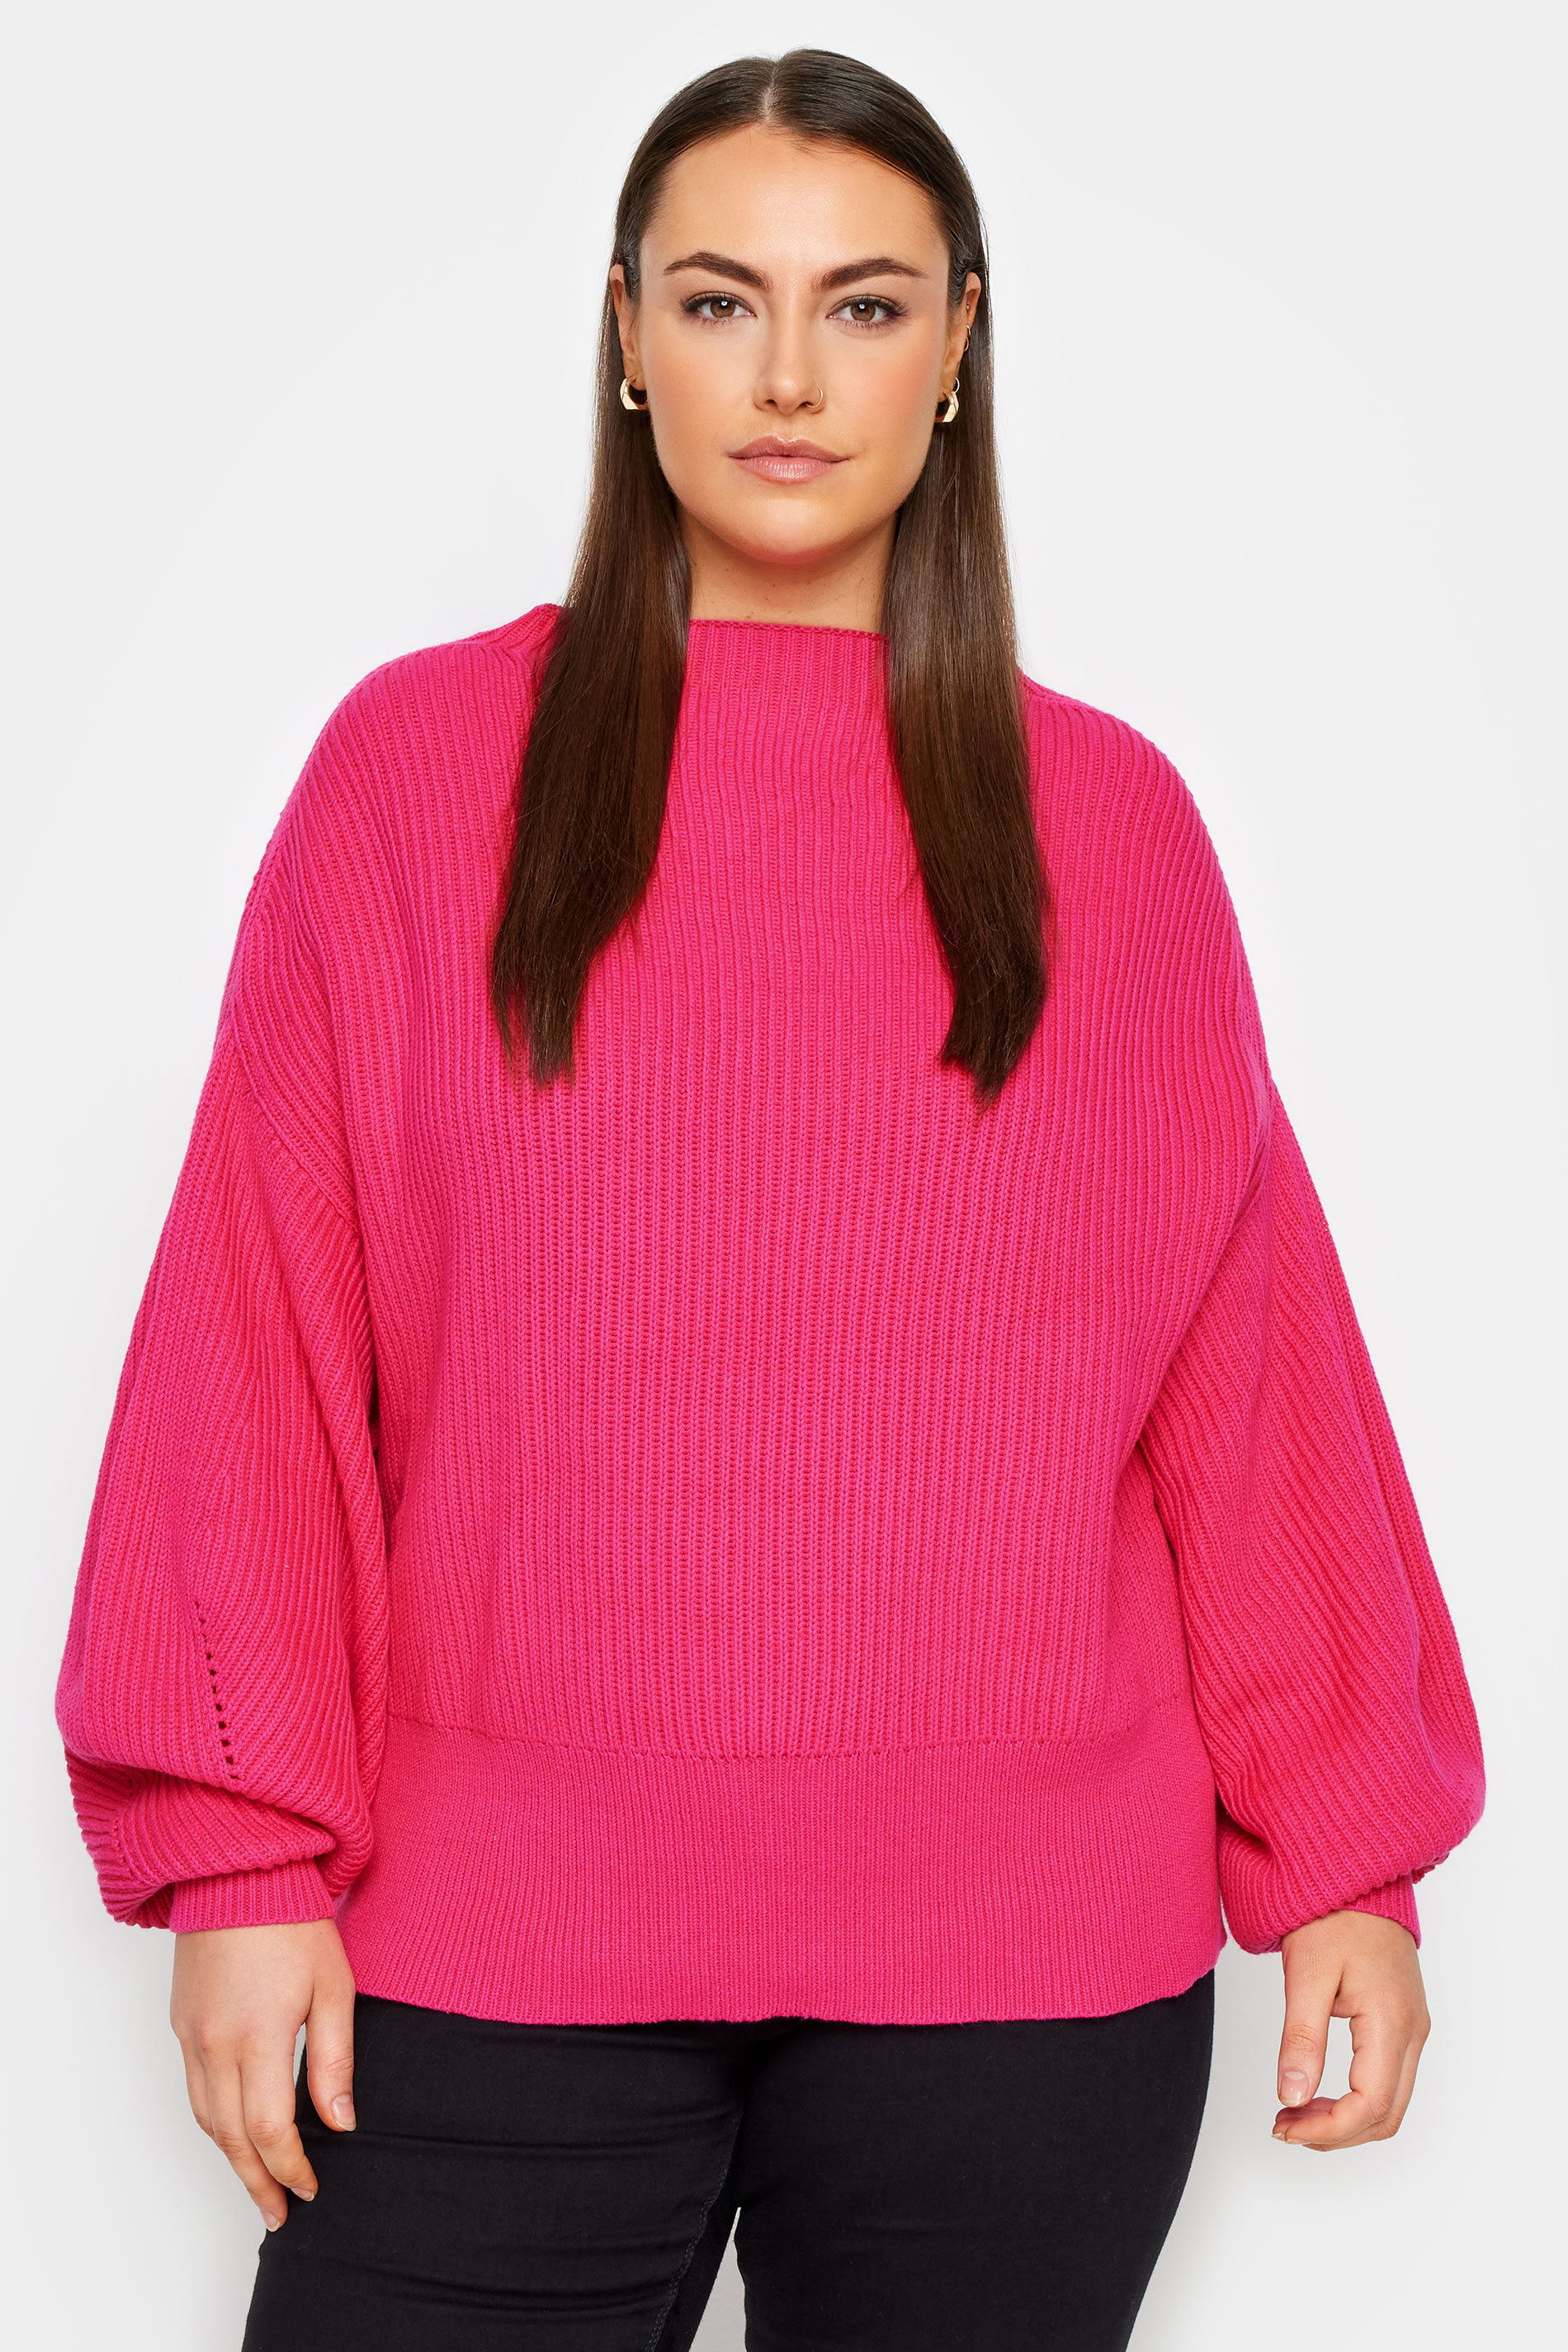 Evans Bright Pink Balloon Sleeve Knitted Jumper 1